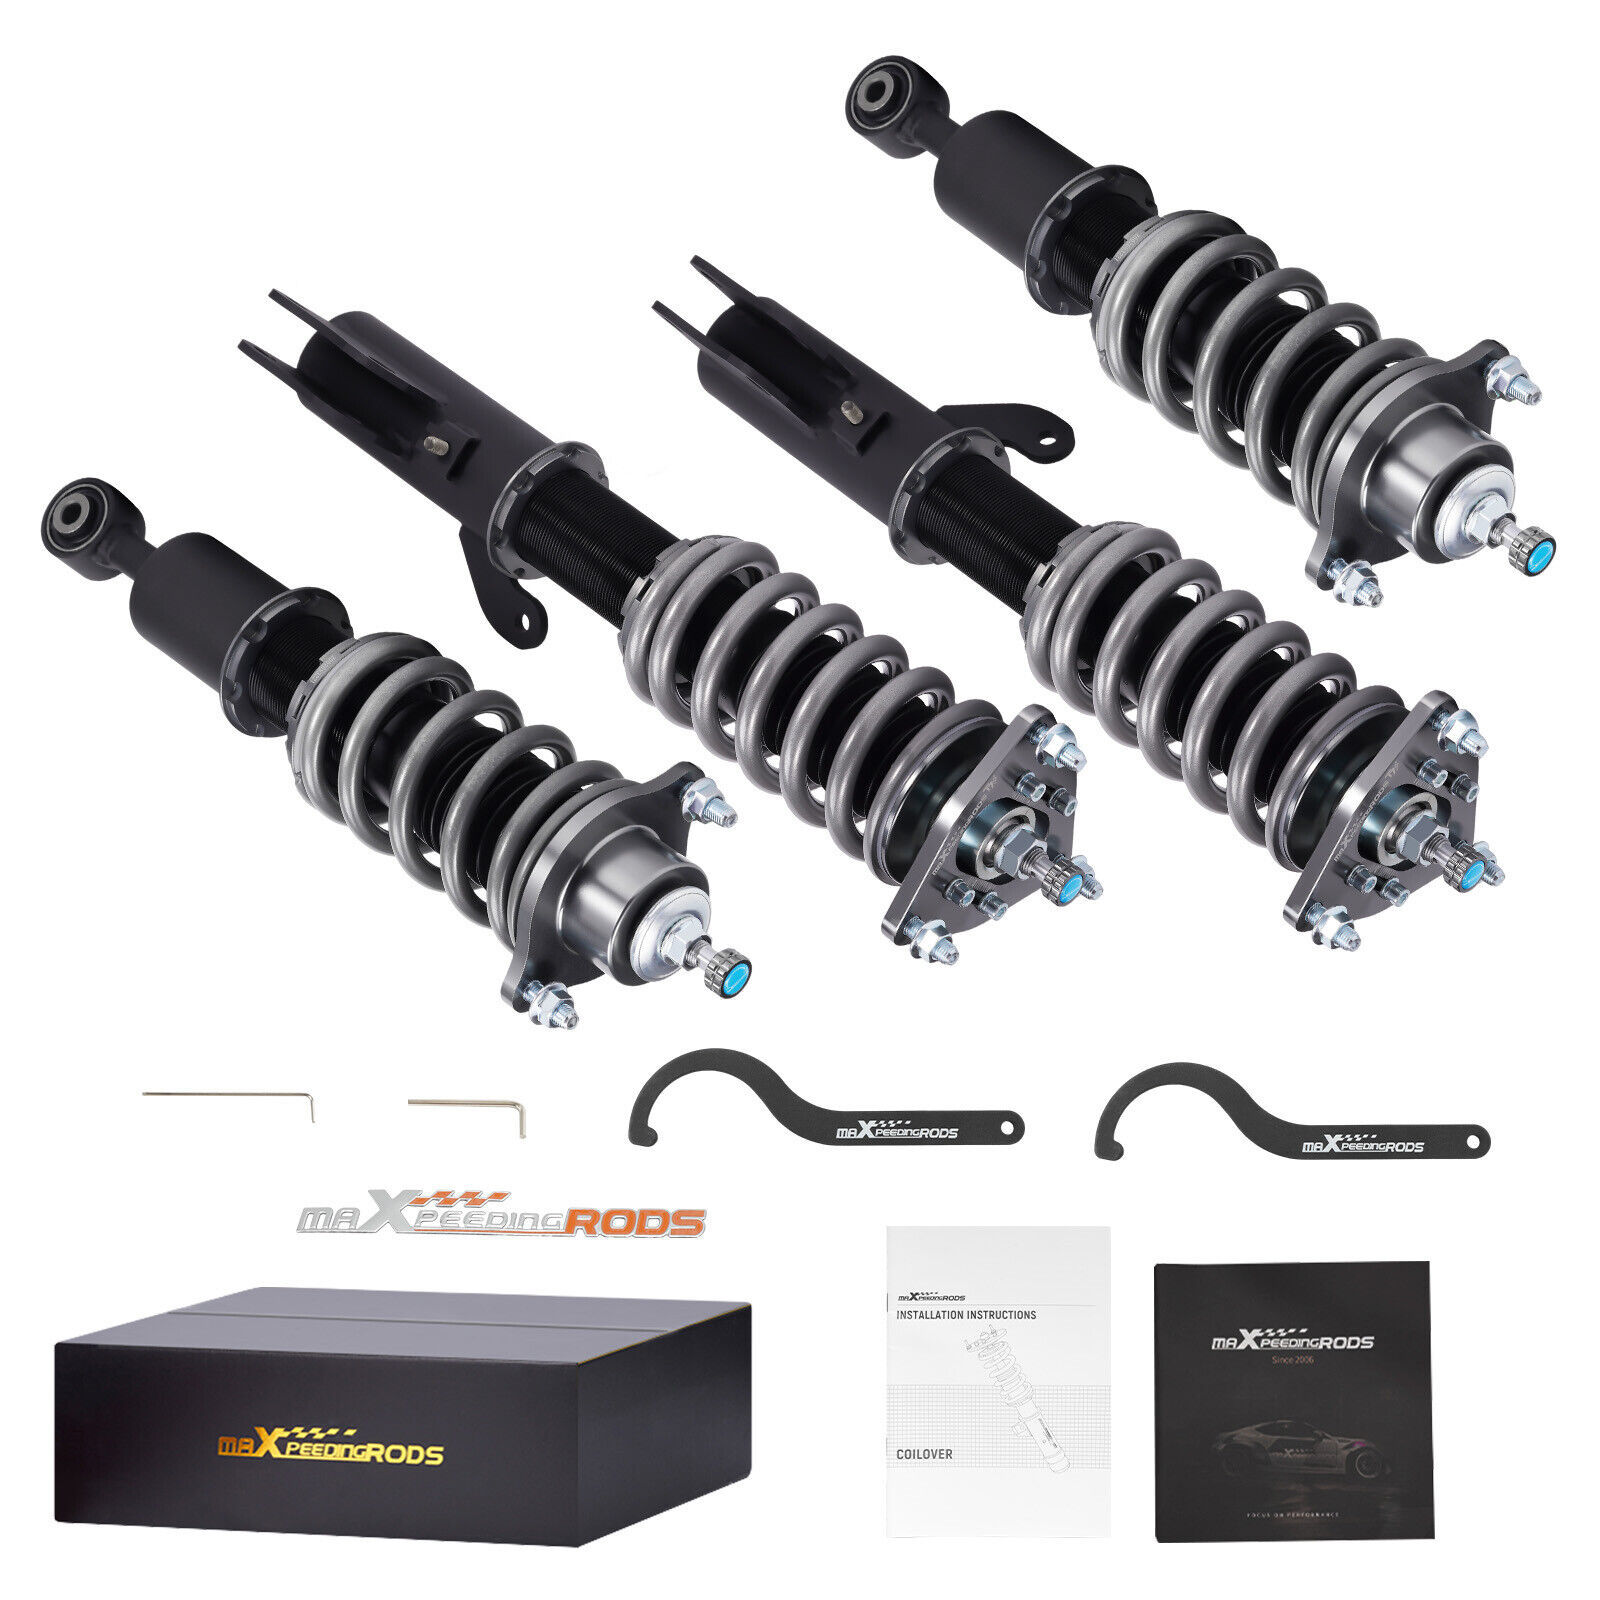 Primary image for MaXpeedingrods COT7 Coilovers 24 Click Suspension for Mitsubishi Lancer 08-16